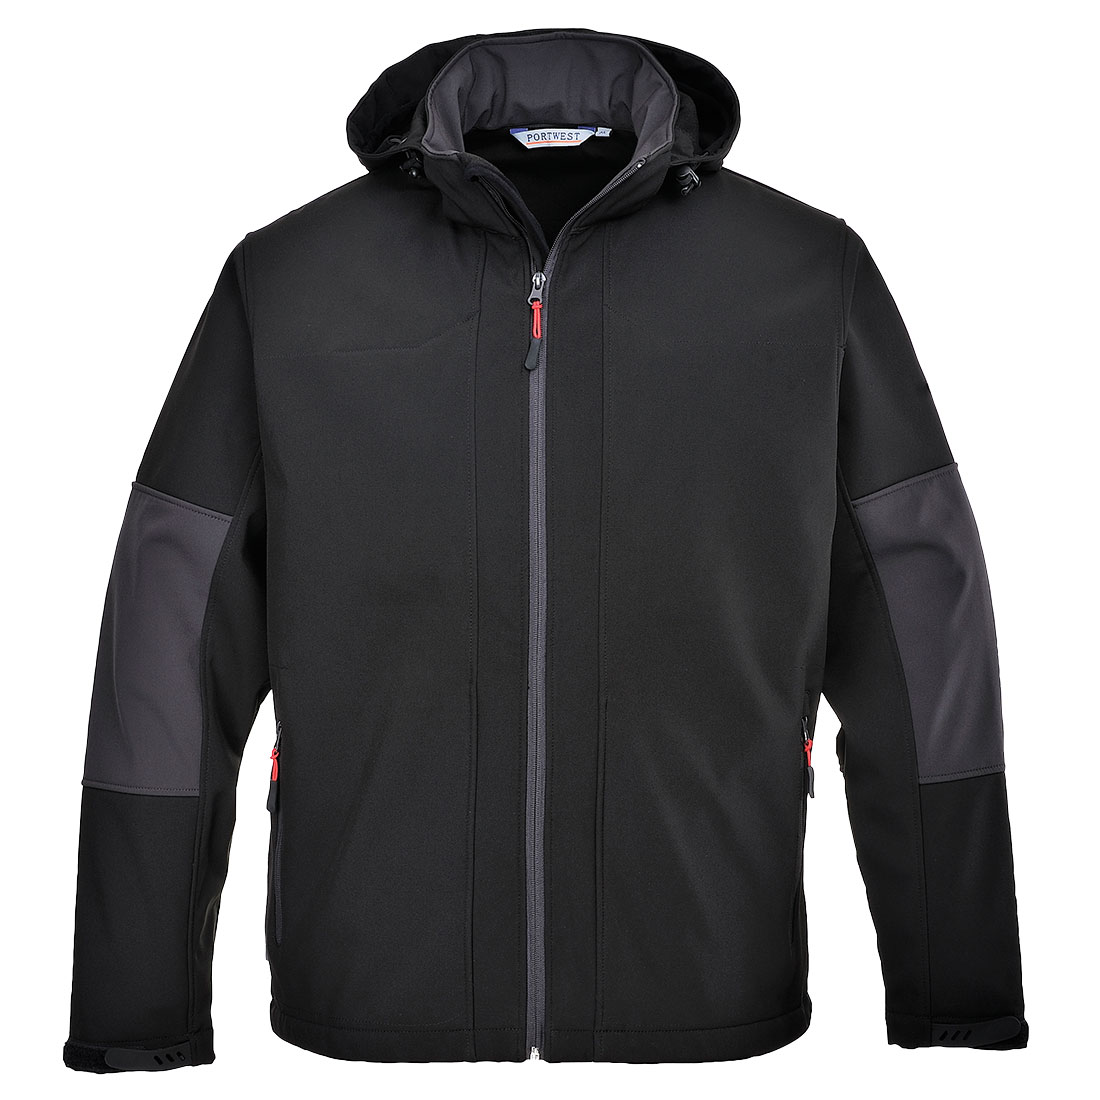 Portwest Softshell with Hood (3L)